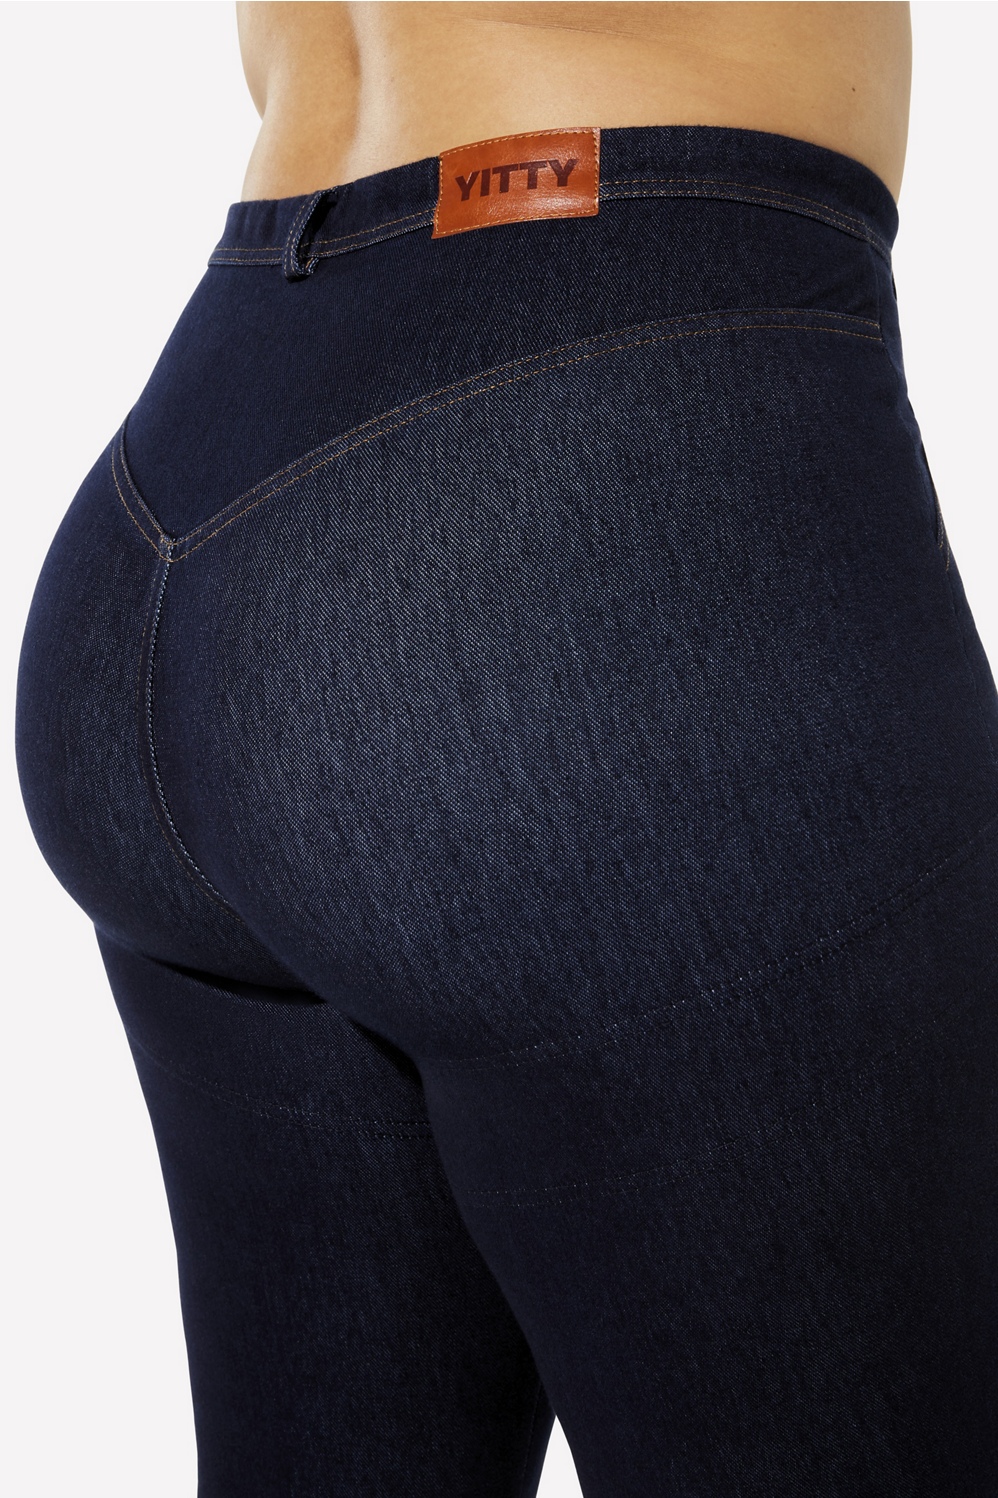 Smoothing Stretch Jean Served - Yitty Denim Is